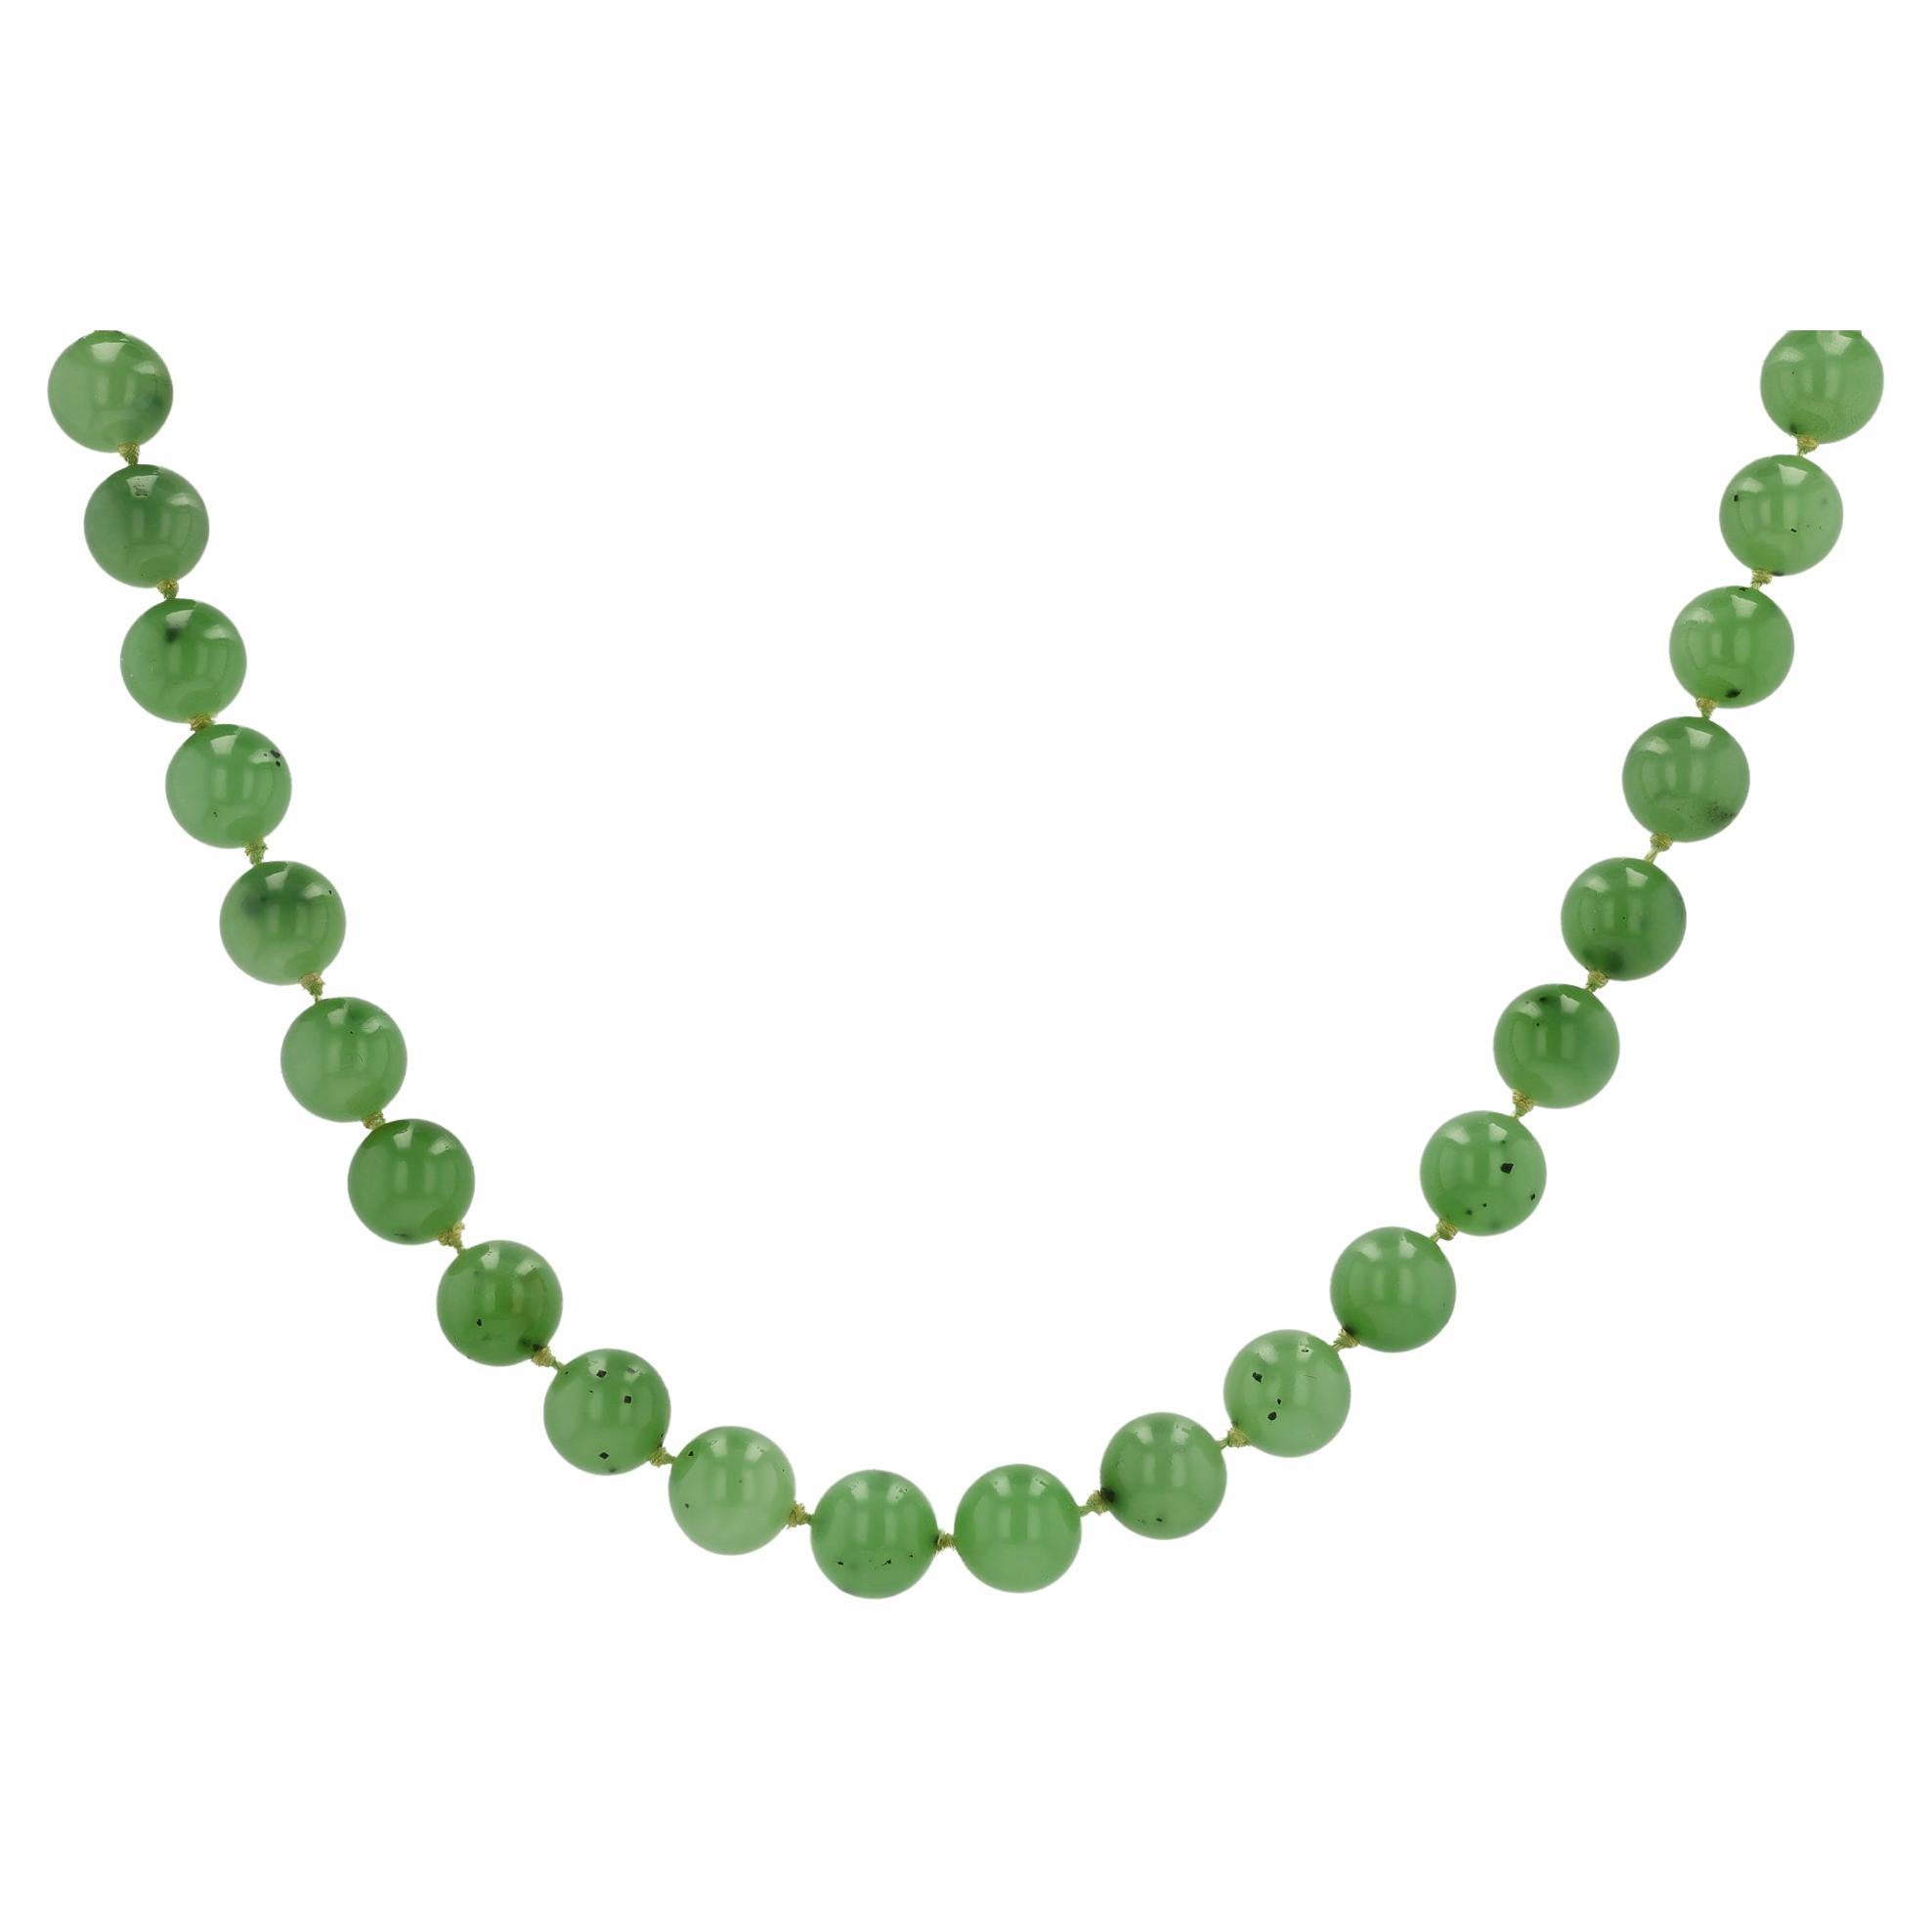 A 1960s vintage signed Gump's Siberian nephrite jade necklace, with generous length and vibrance. These beautiful, untreated jade beads are a translucent light chartreuse green. A bezel set oval cabochon Jade adds a subtle finishing touch to the 14k